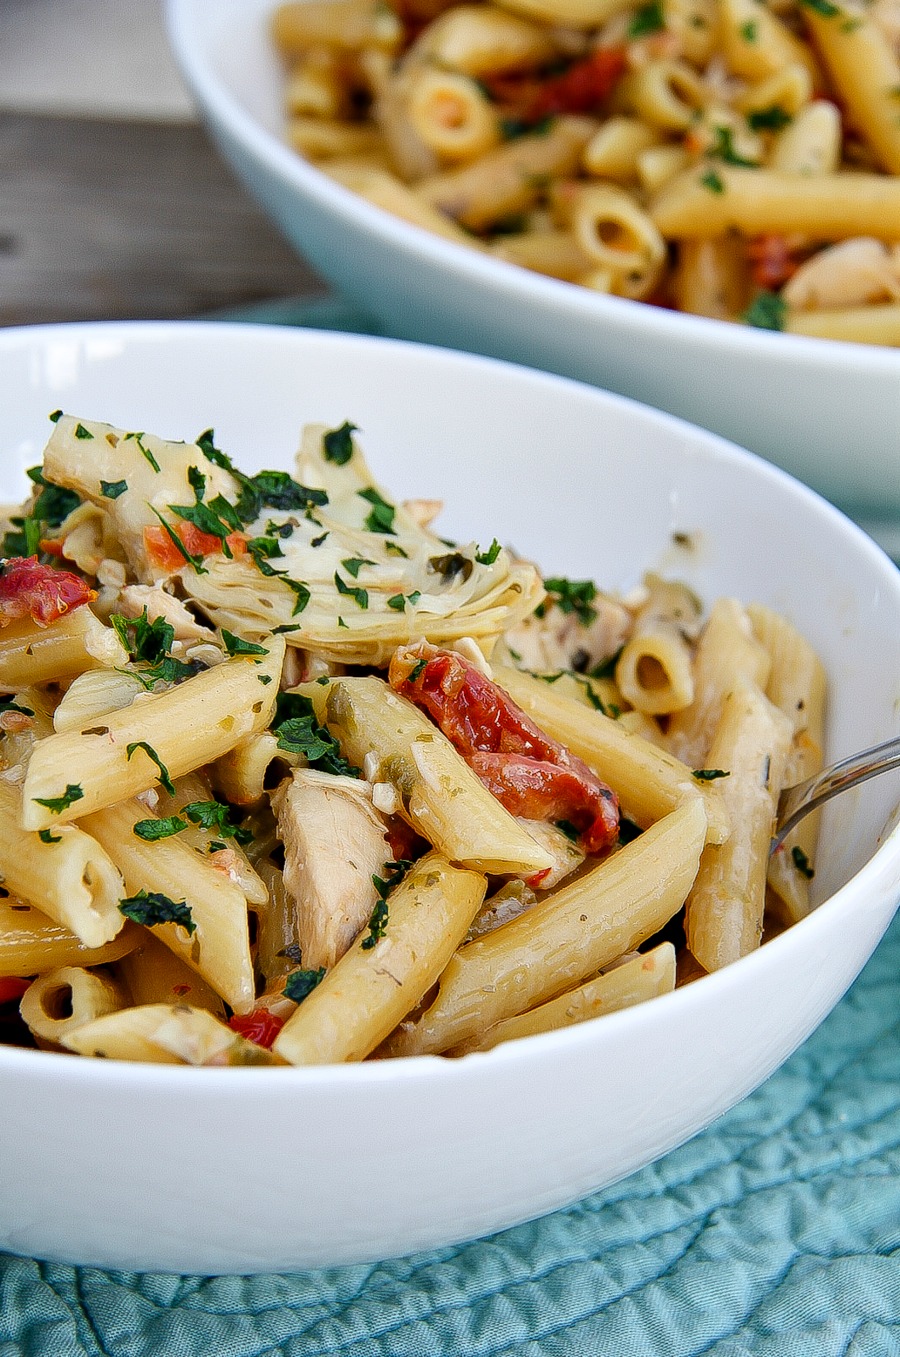 This One Pot Chicken Artichoke Pasta recipe made with artichokes, sun-dried tomatoes, and capers, is the perfect weeknight dinner. You are bound to love this hearty dish that can be ready in about 30 minutes with easy cleanup. 